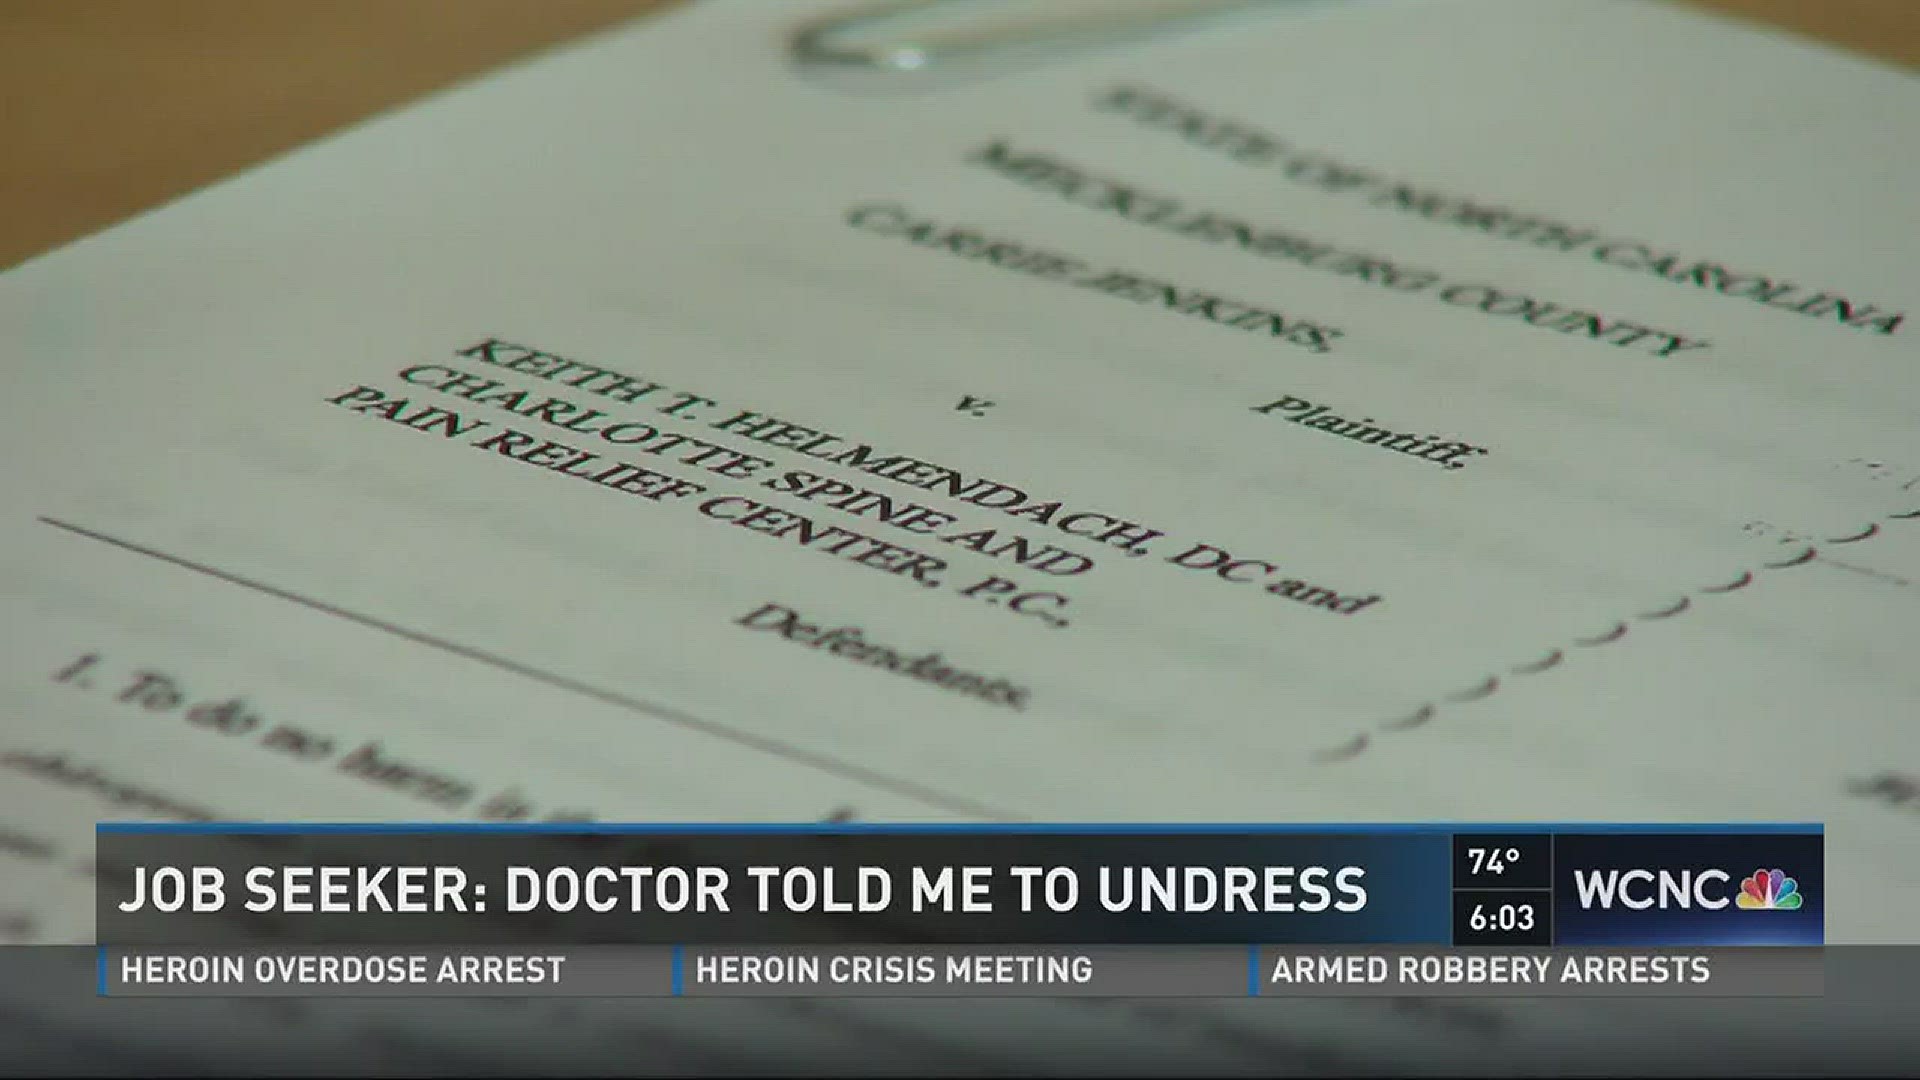 A woman is suing a Mint Hill chiropractor, claiming he told her to undress during a job interview in 2014.